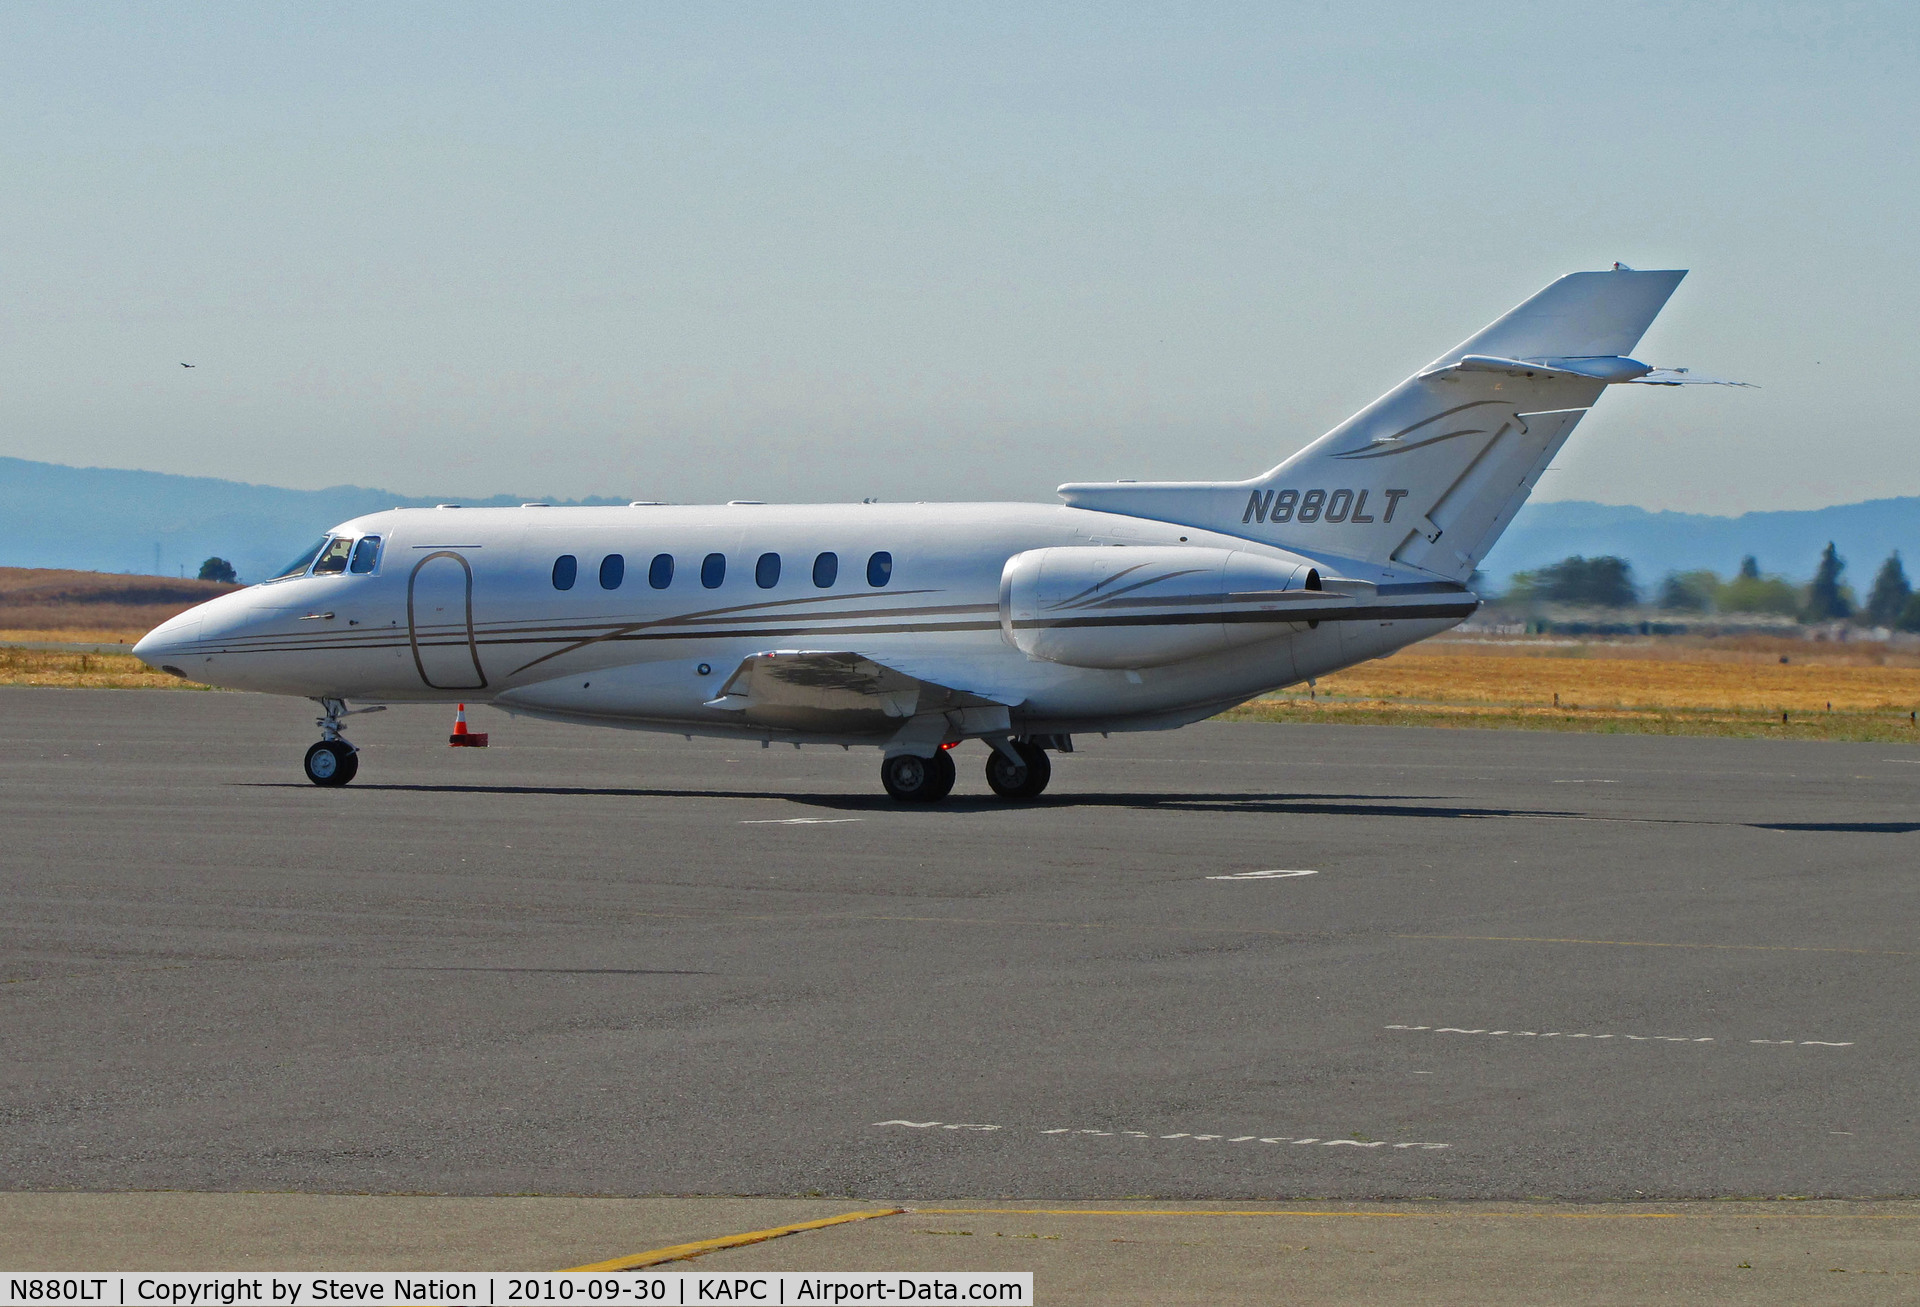 N880LT, 1996 Raytheon Corporate Jets Inc Hawker 1000 C/N 259051, MN-based Life Time Fitness 1996 Hawker 1000 on arrival